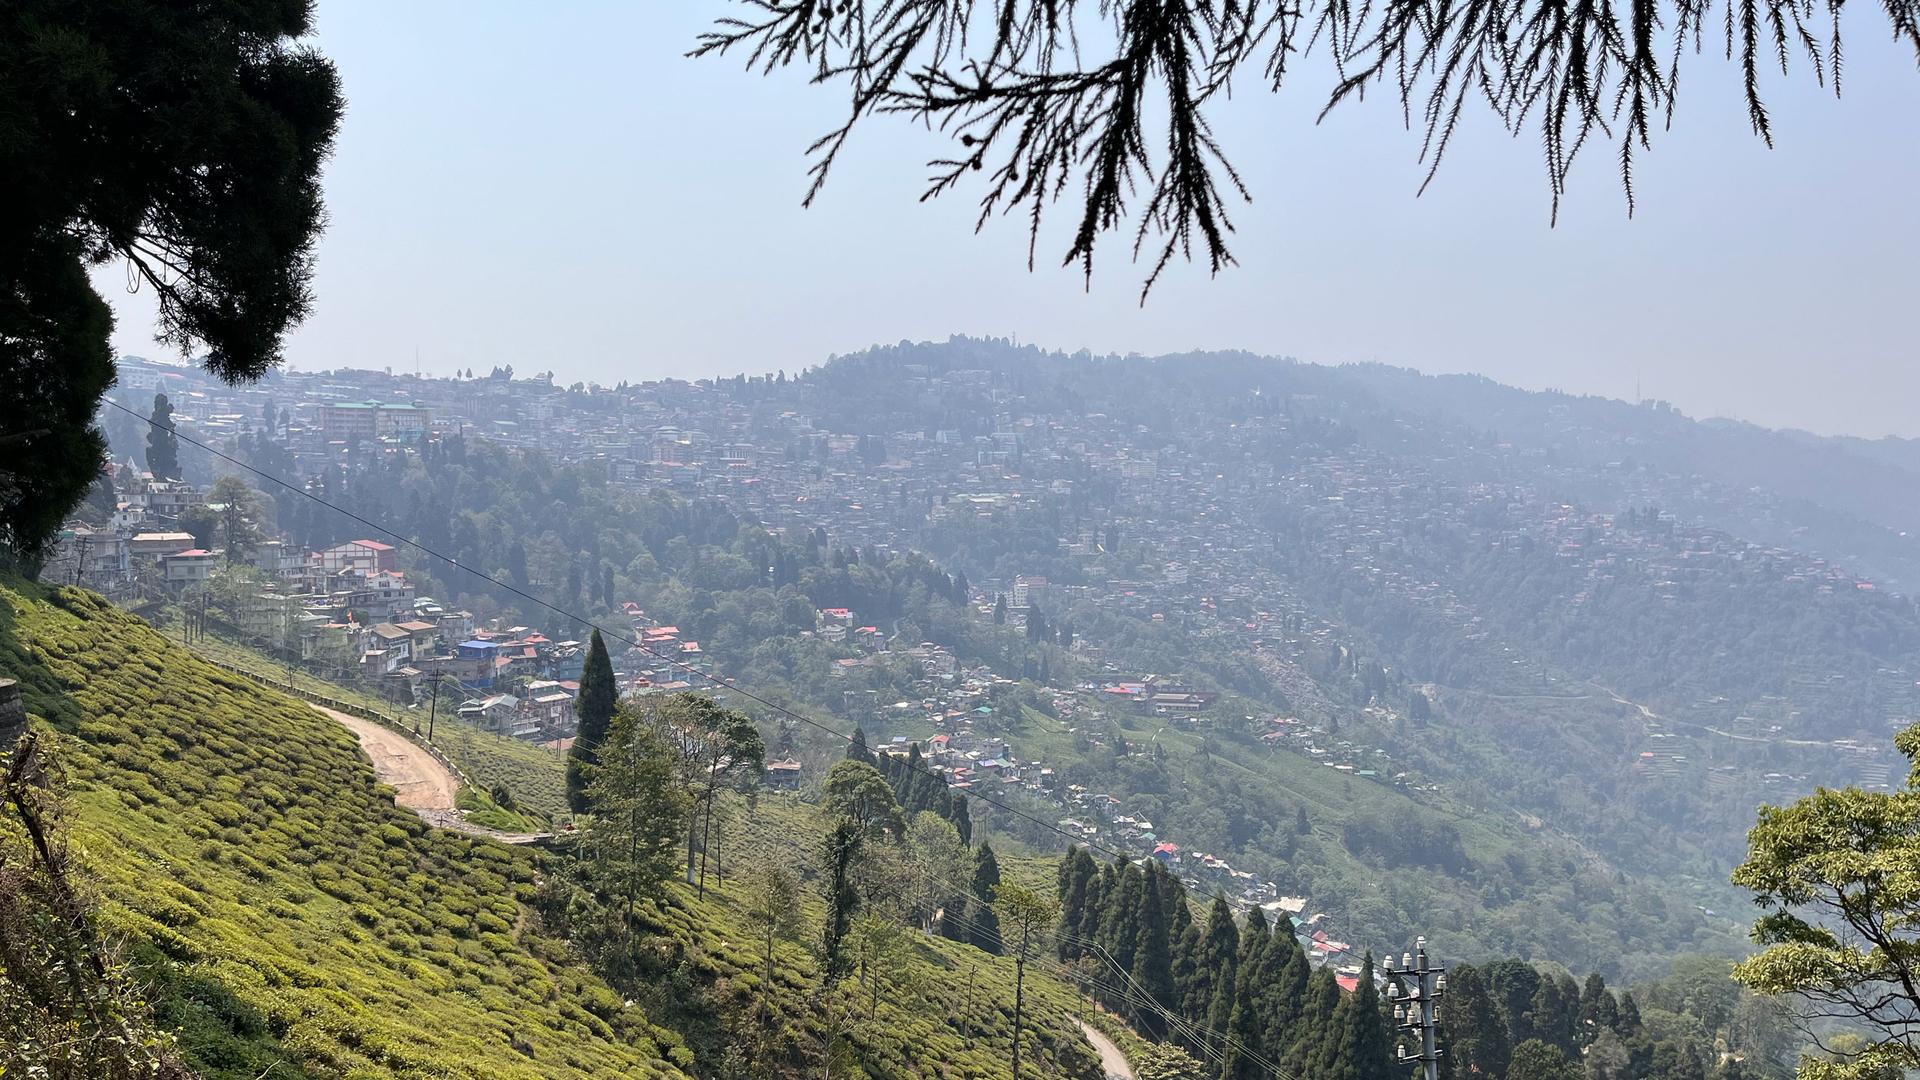 Darjeeling is nestled amid lush tea gardens and overlooking the snow-capped Himalayas in India’s northeast. But landscapes like these pose challenges while conducting elections.